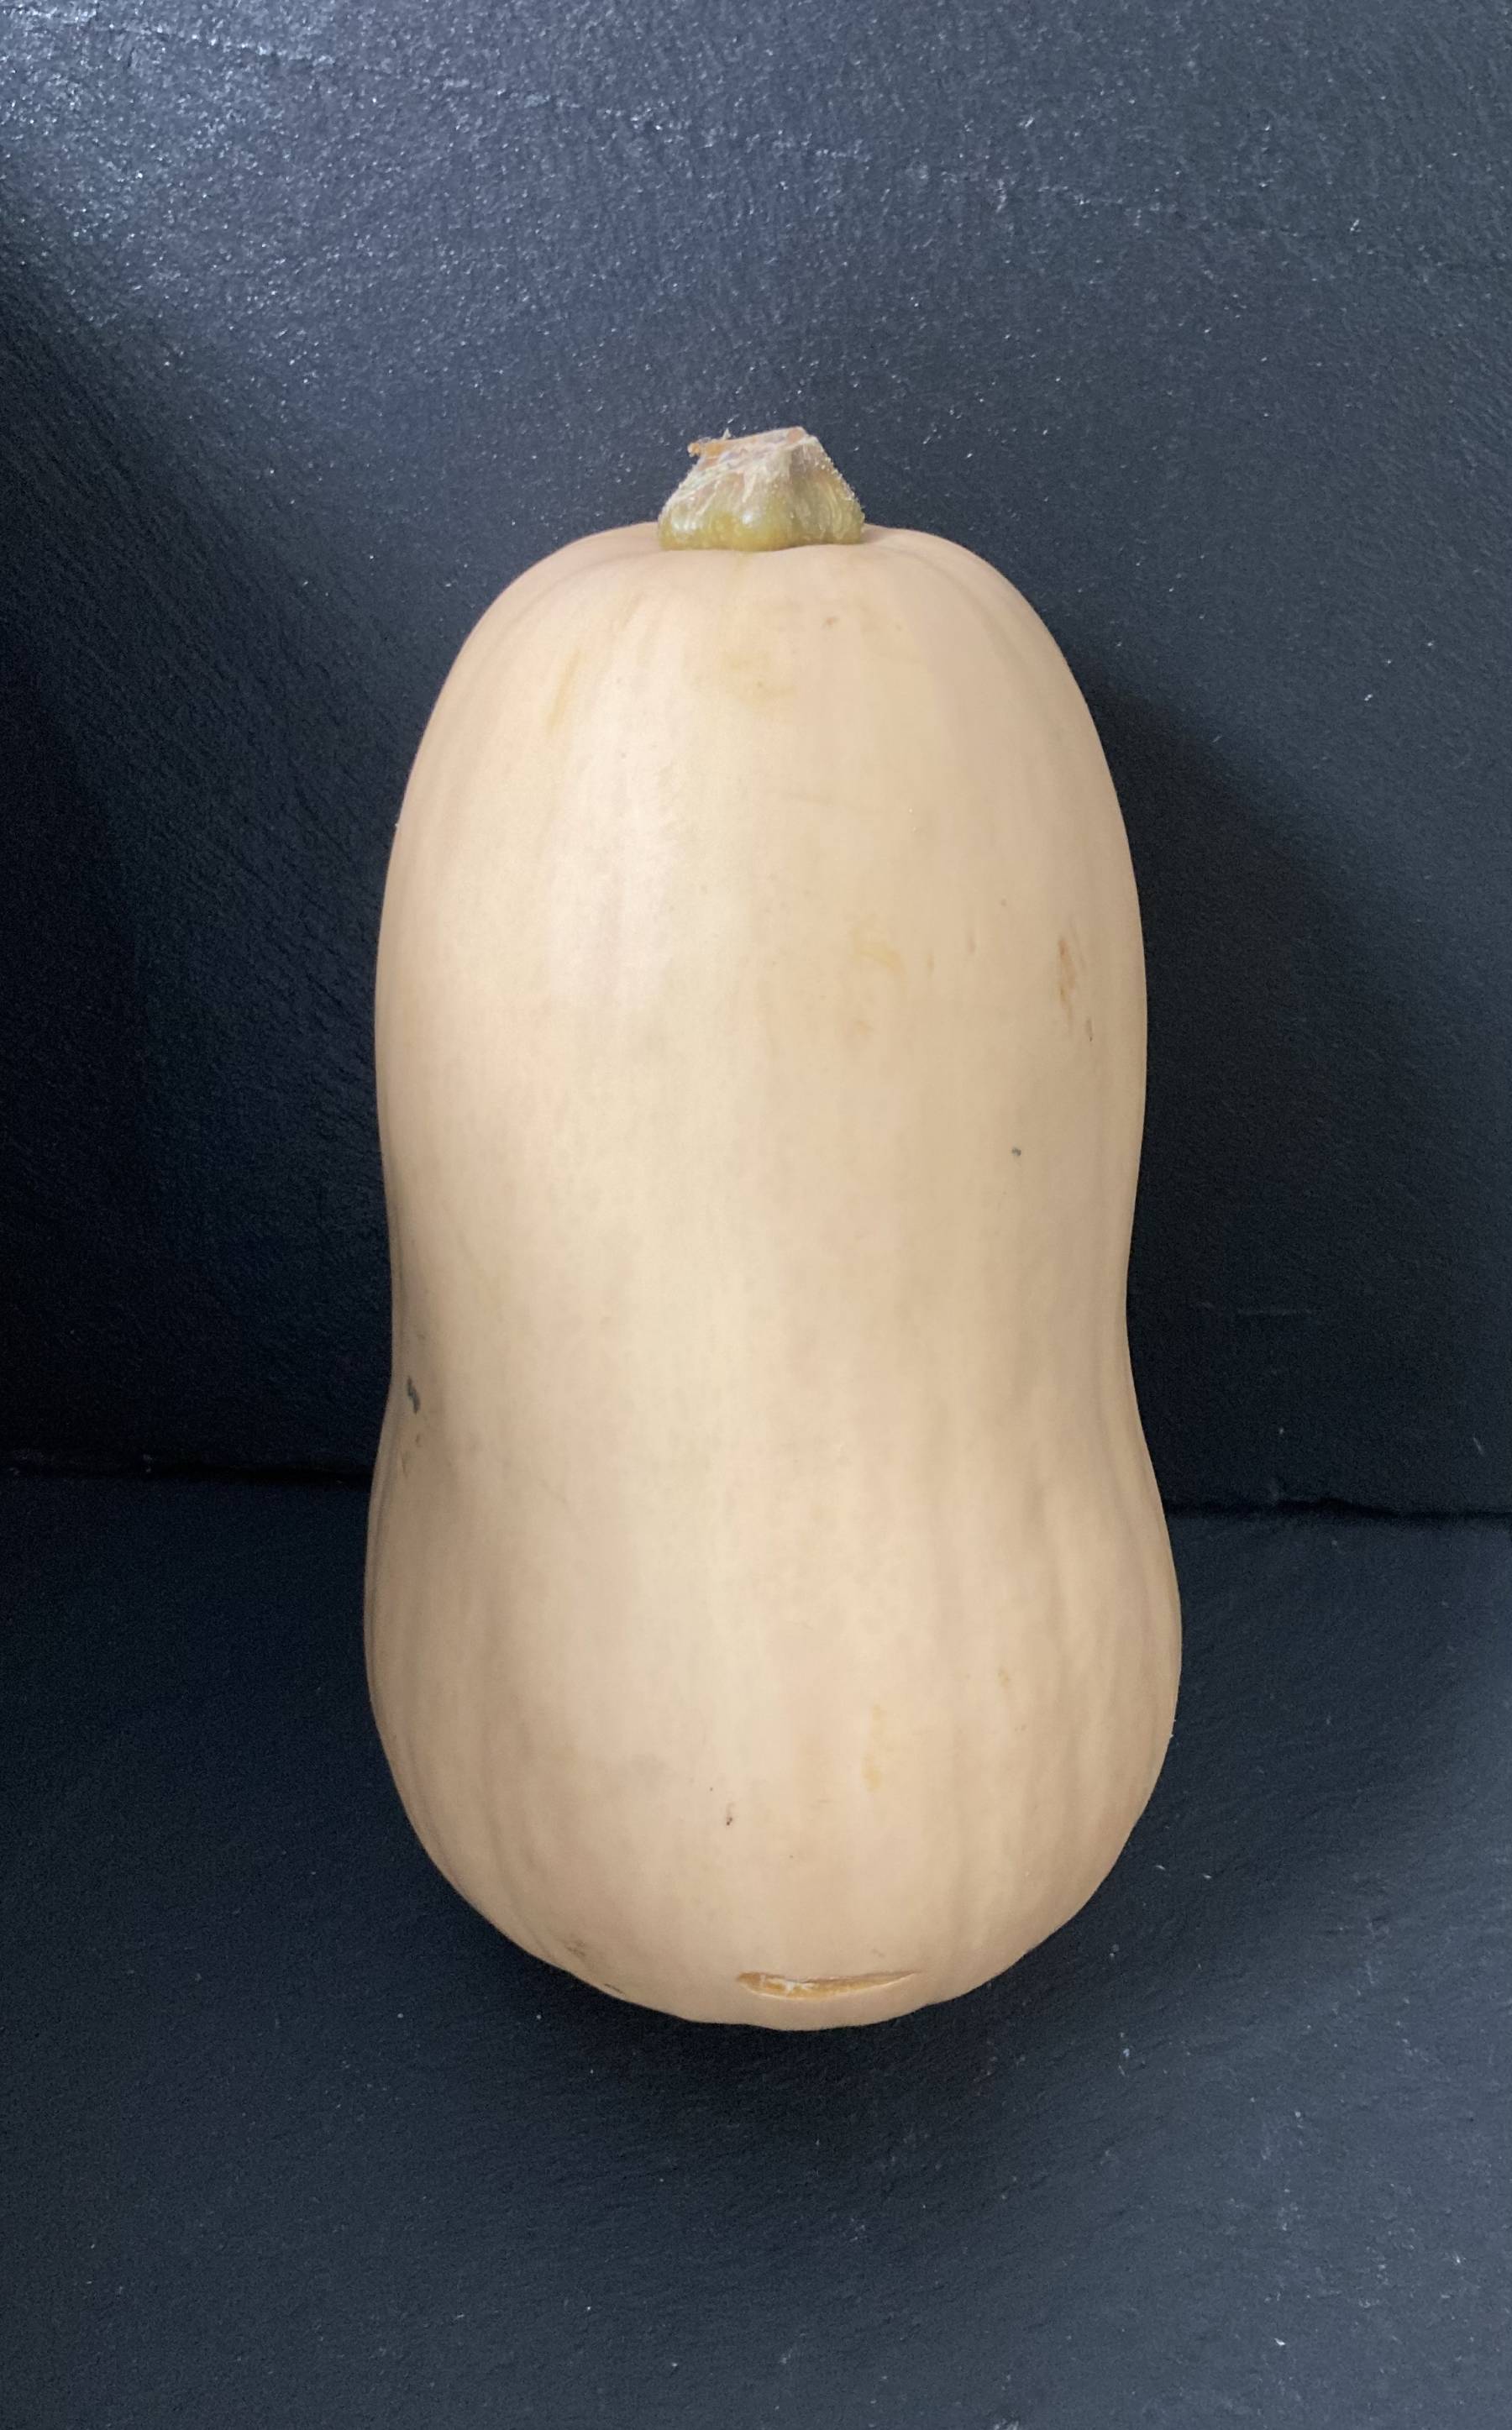 Courge butternut 